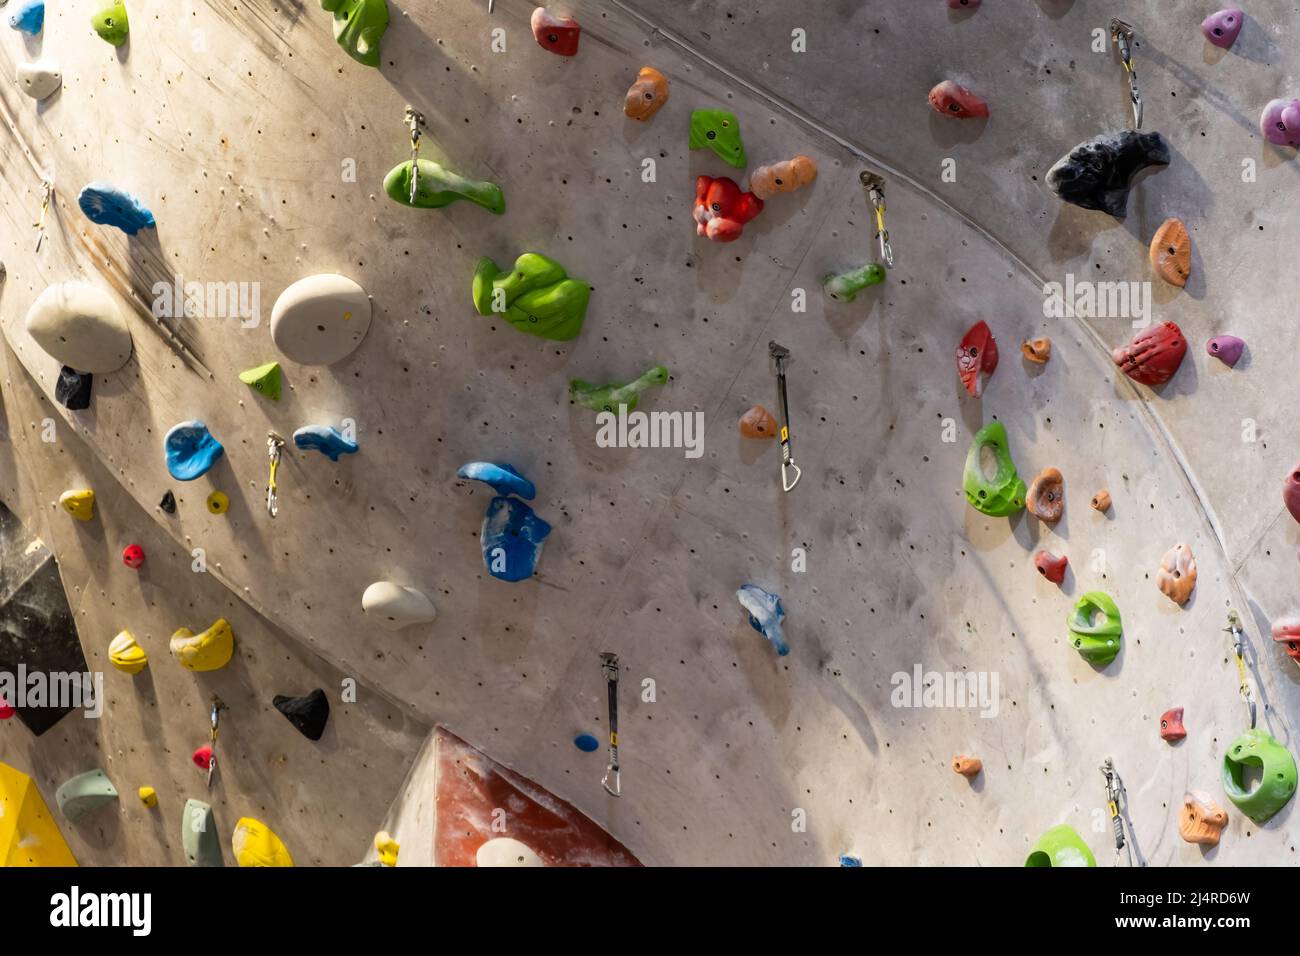 Artificial rock climbing wall with various colored grips. Stock Photo